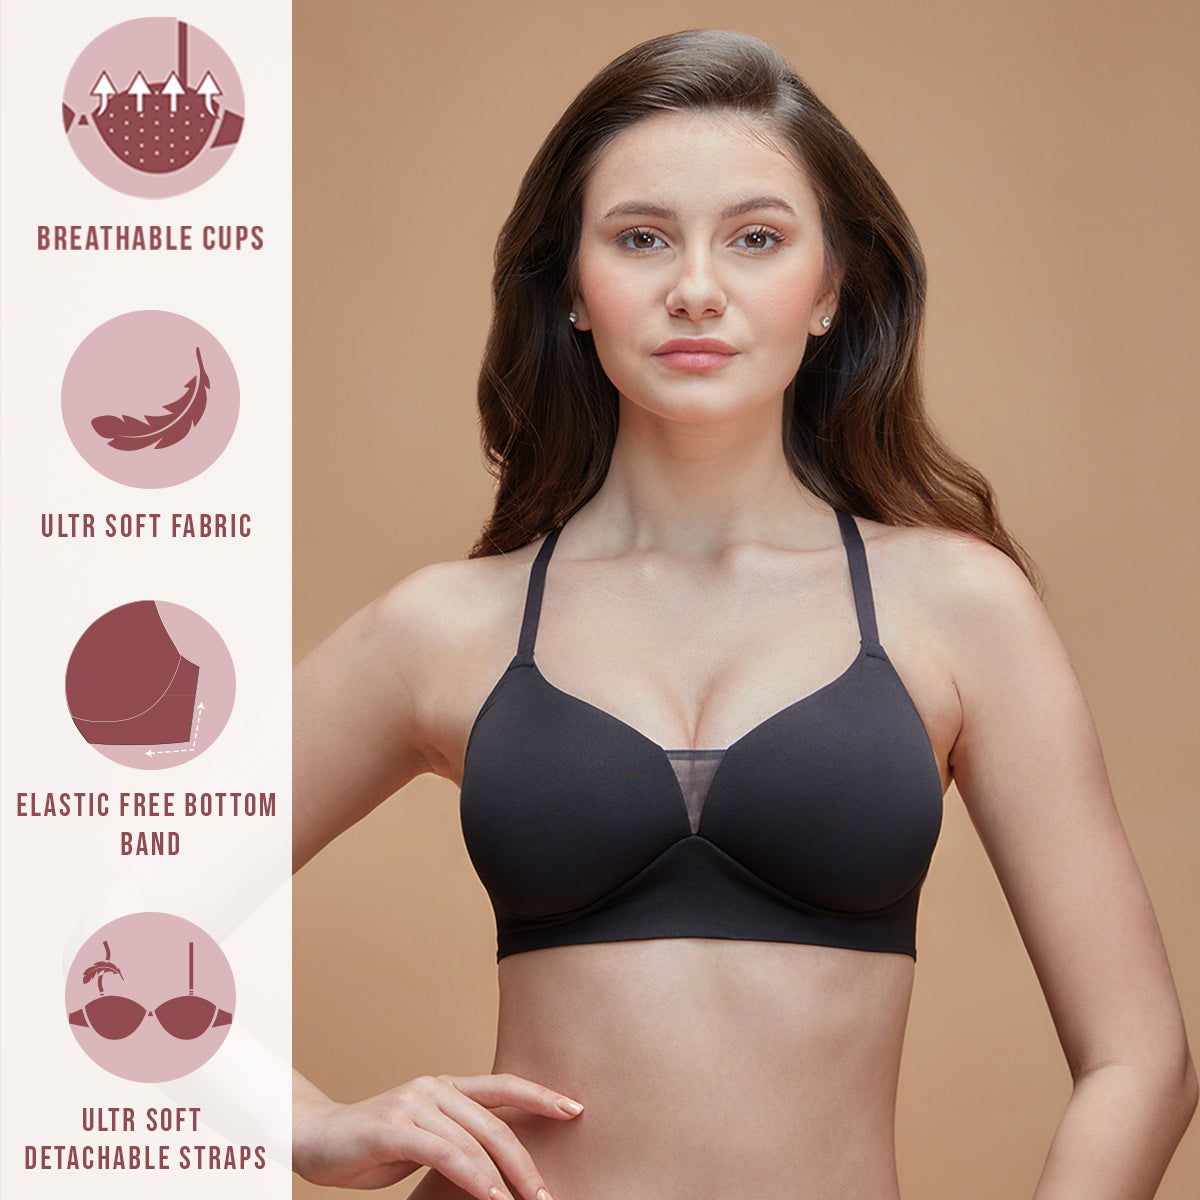 sport bra, 32B breathable cup; no underwire-extended foam strip